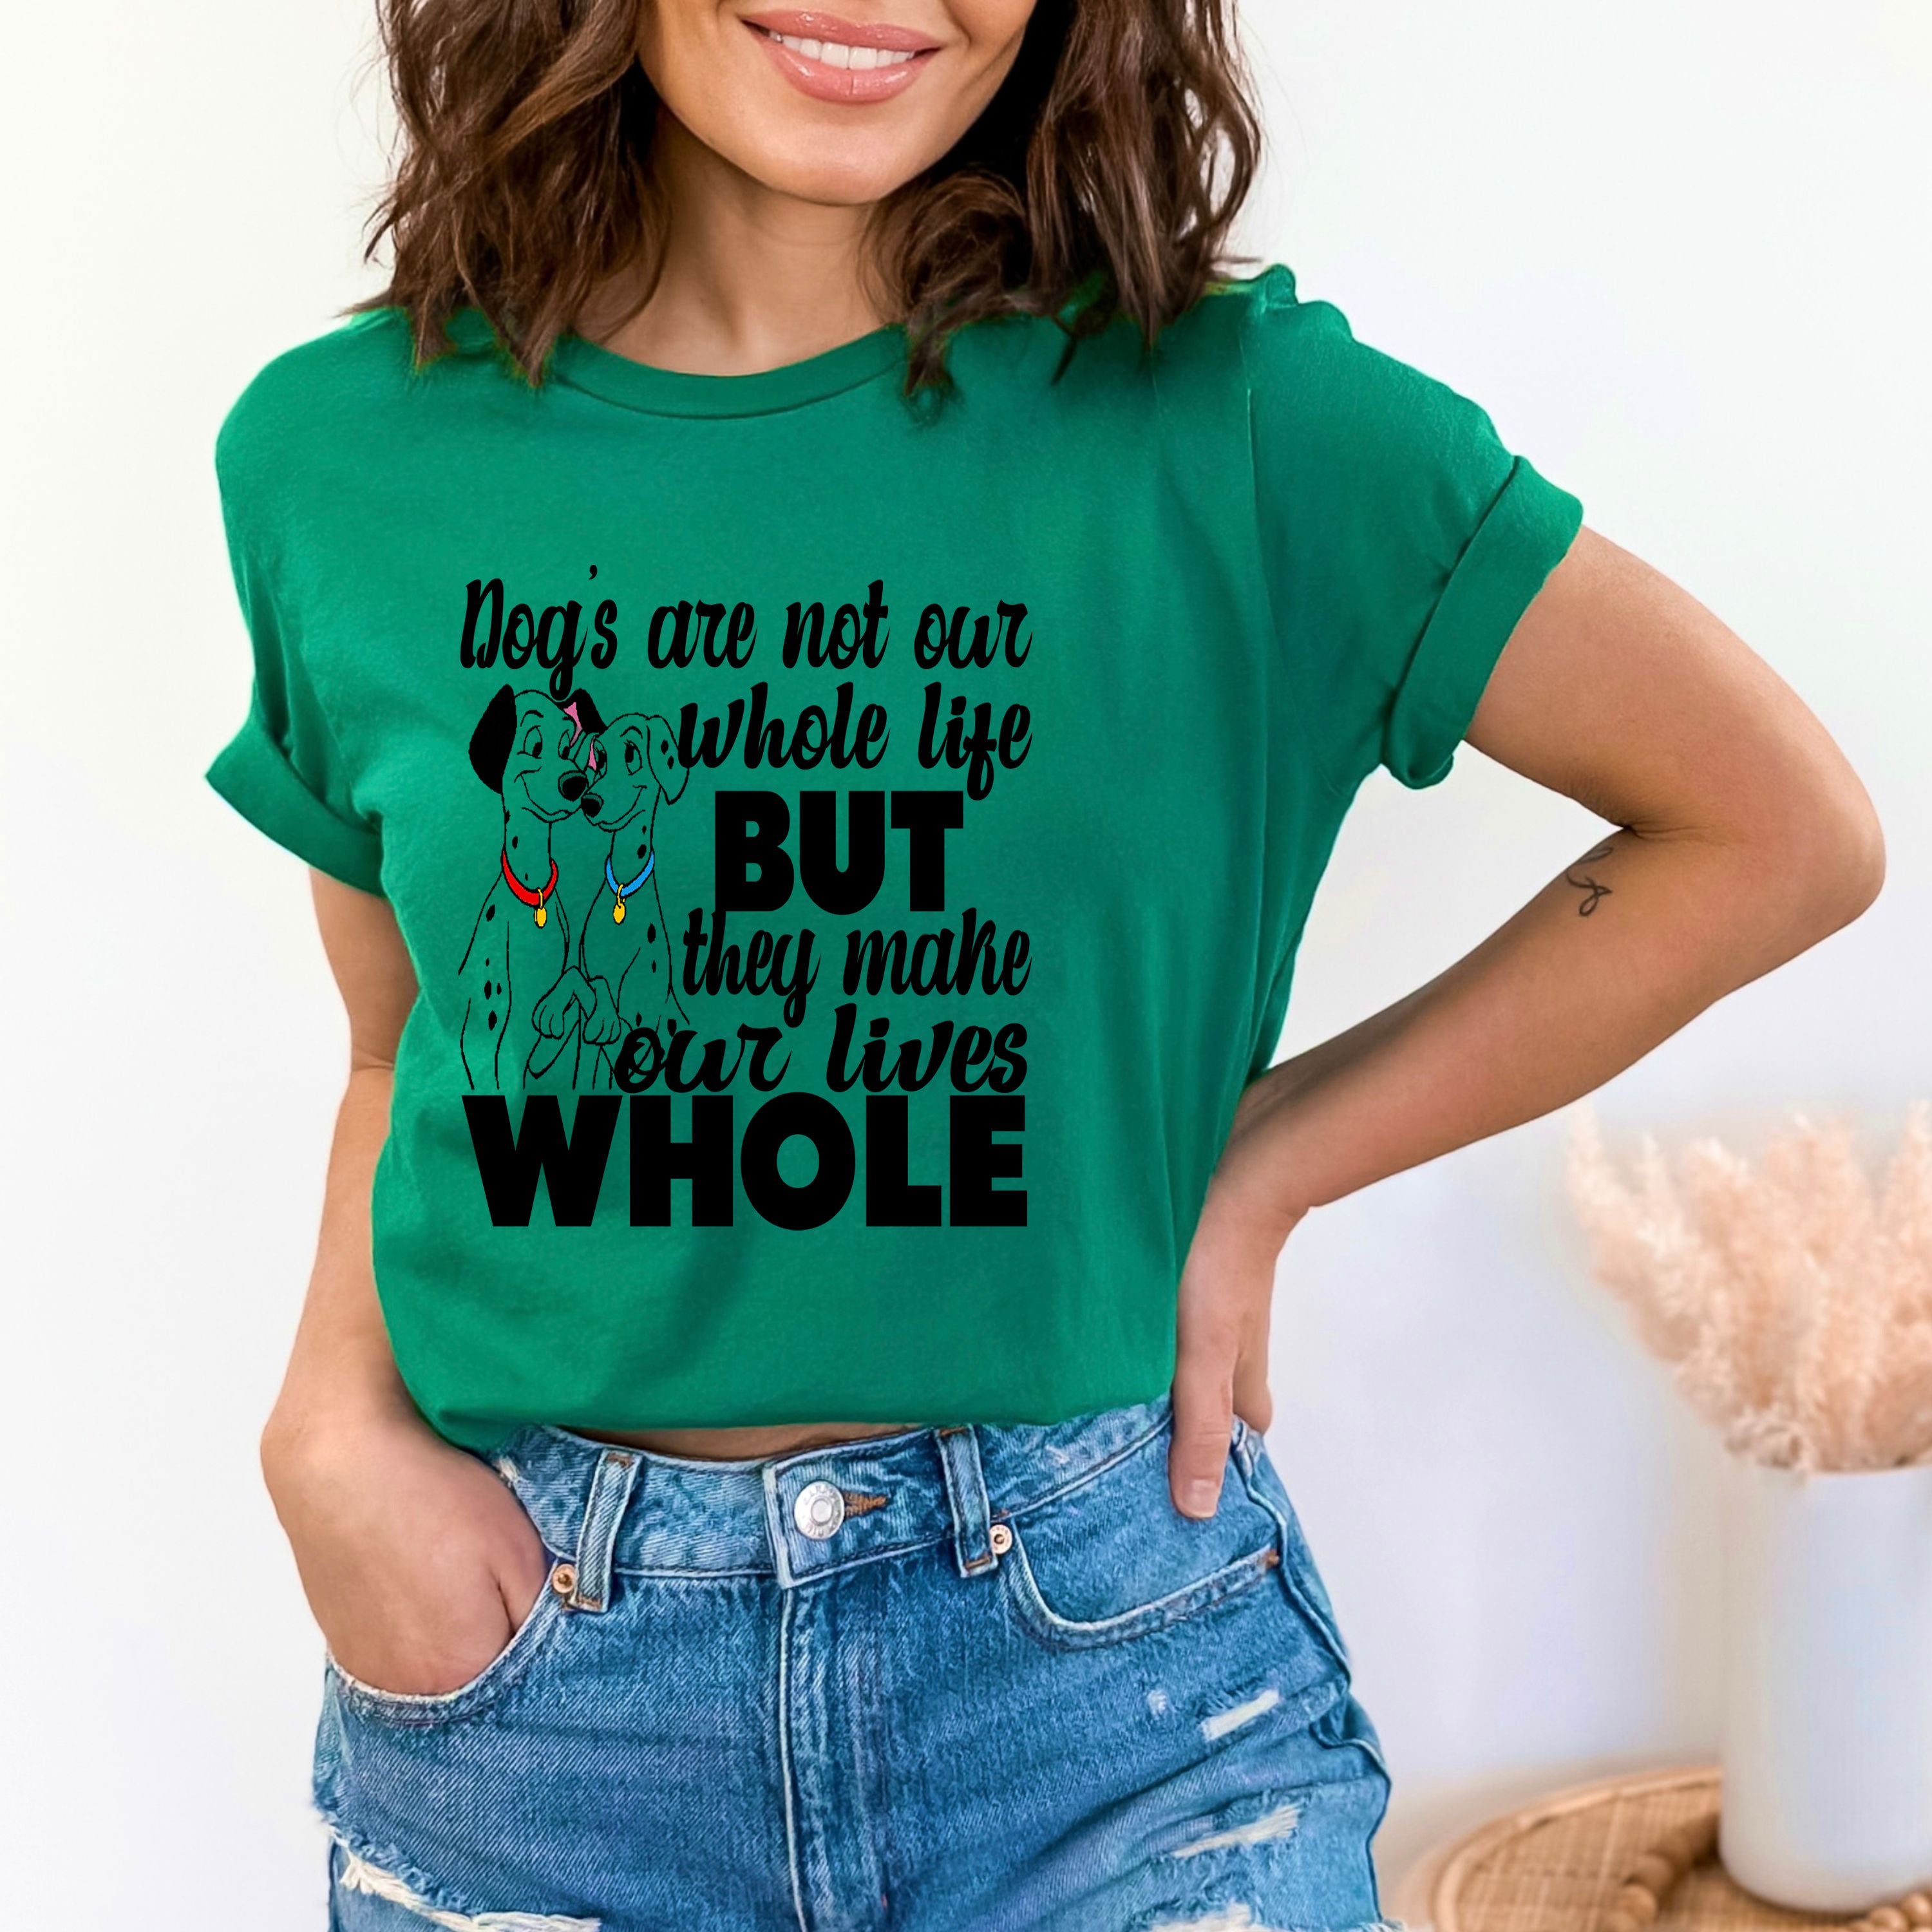 " DOGS MAKE OUR LIVES WHOLE "T-SHIRT